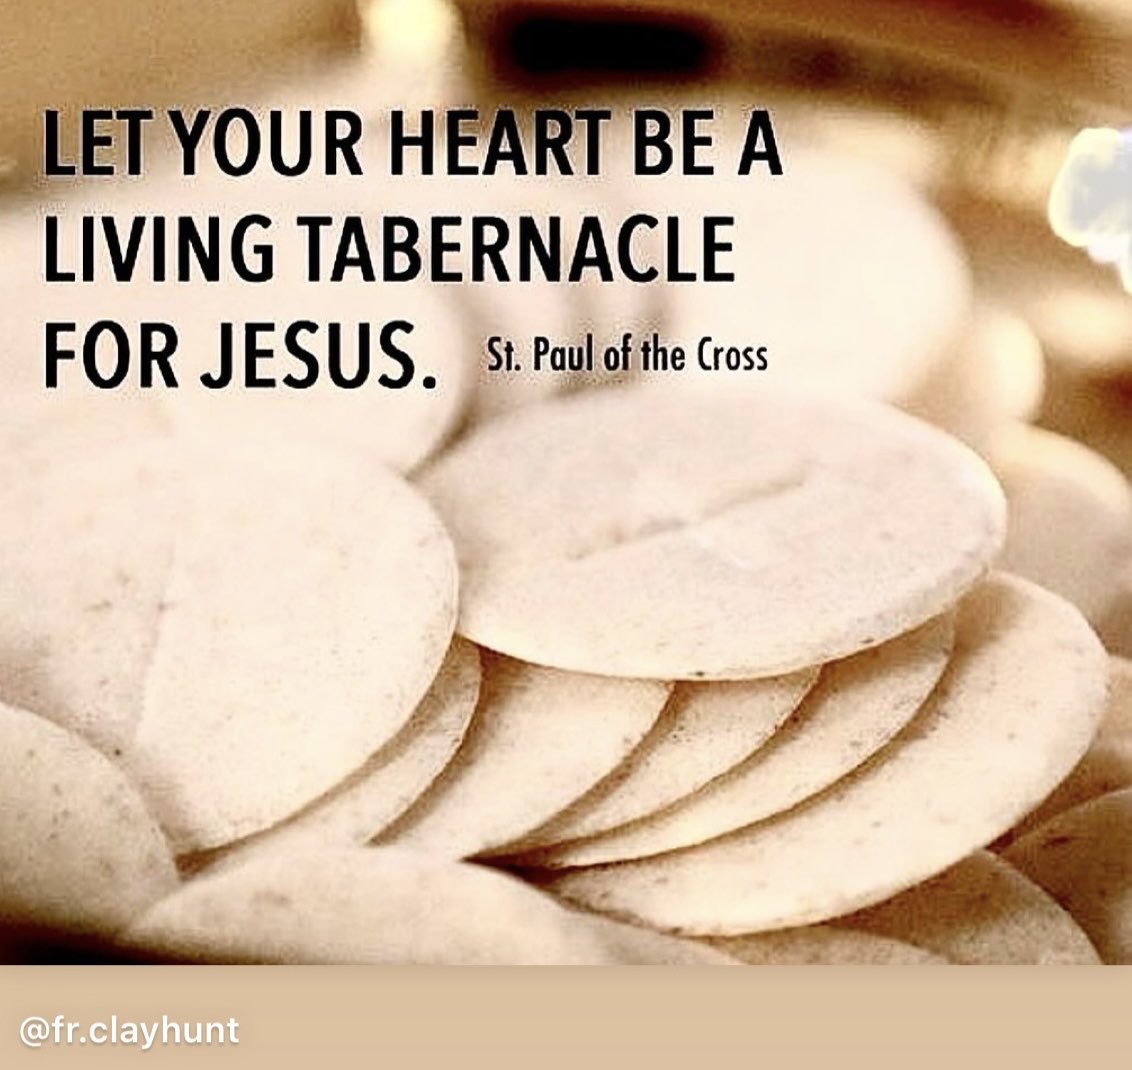 💕💕💕

Let us be “living tabernacles” for Jesus! 

#CatholicTwitter